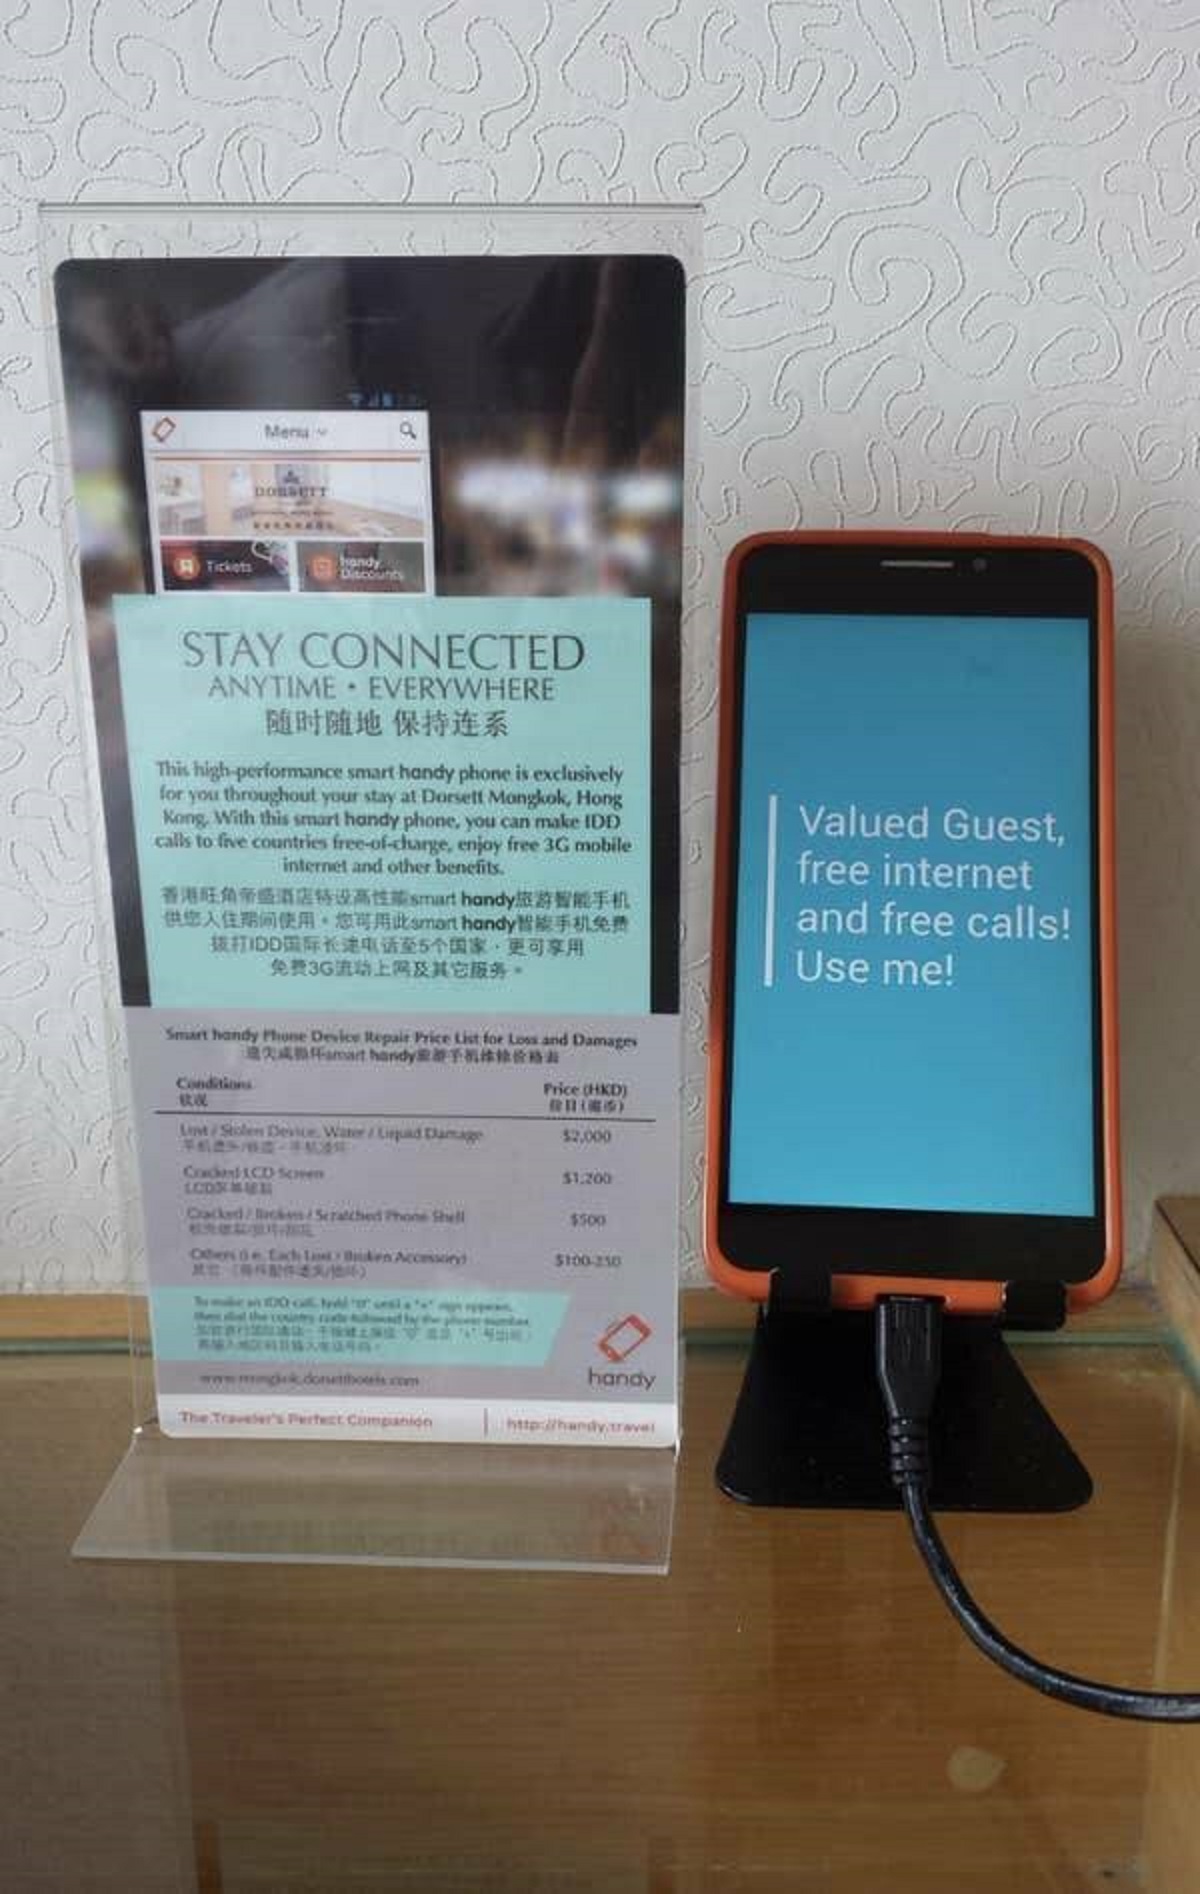 If this Hong Kong hotel can give out free phones with data and free calling to five countries to visitors, why can't American hotels do the same?